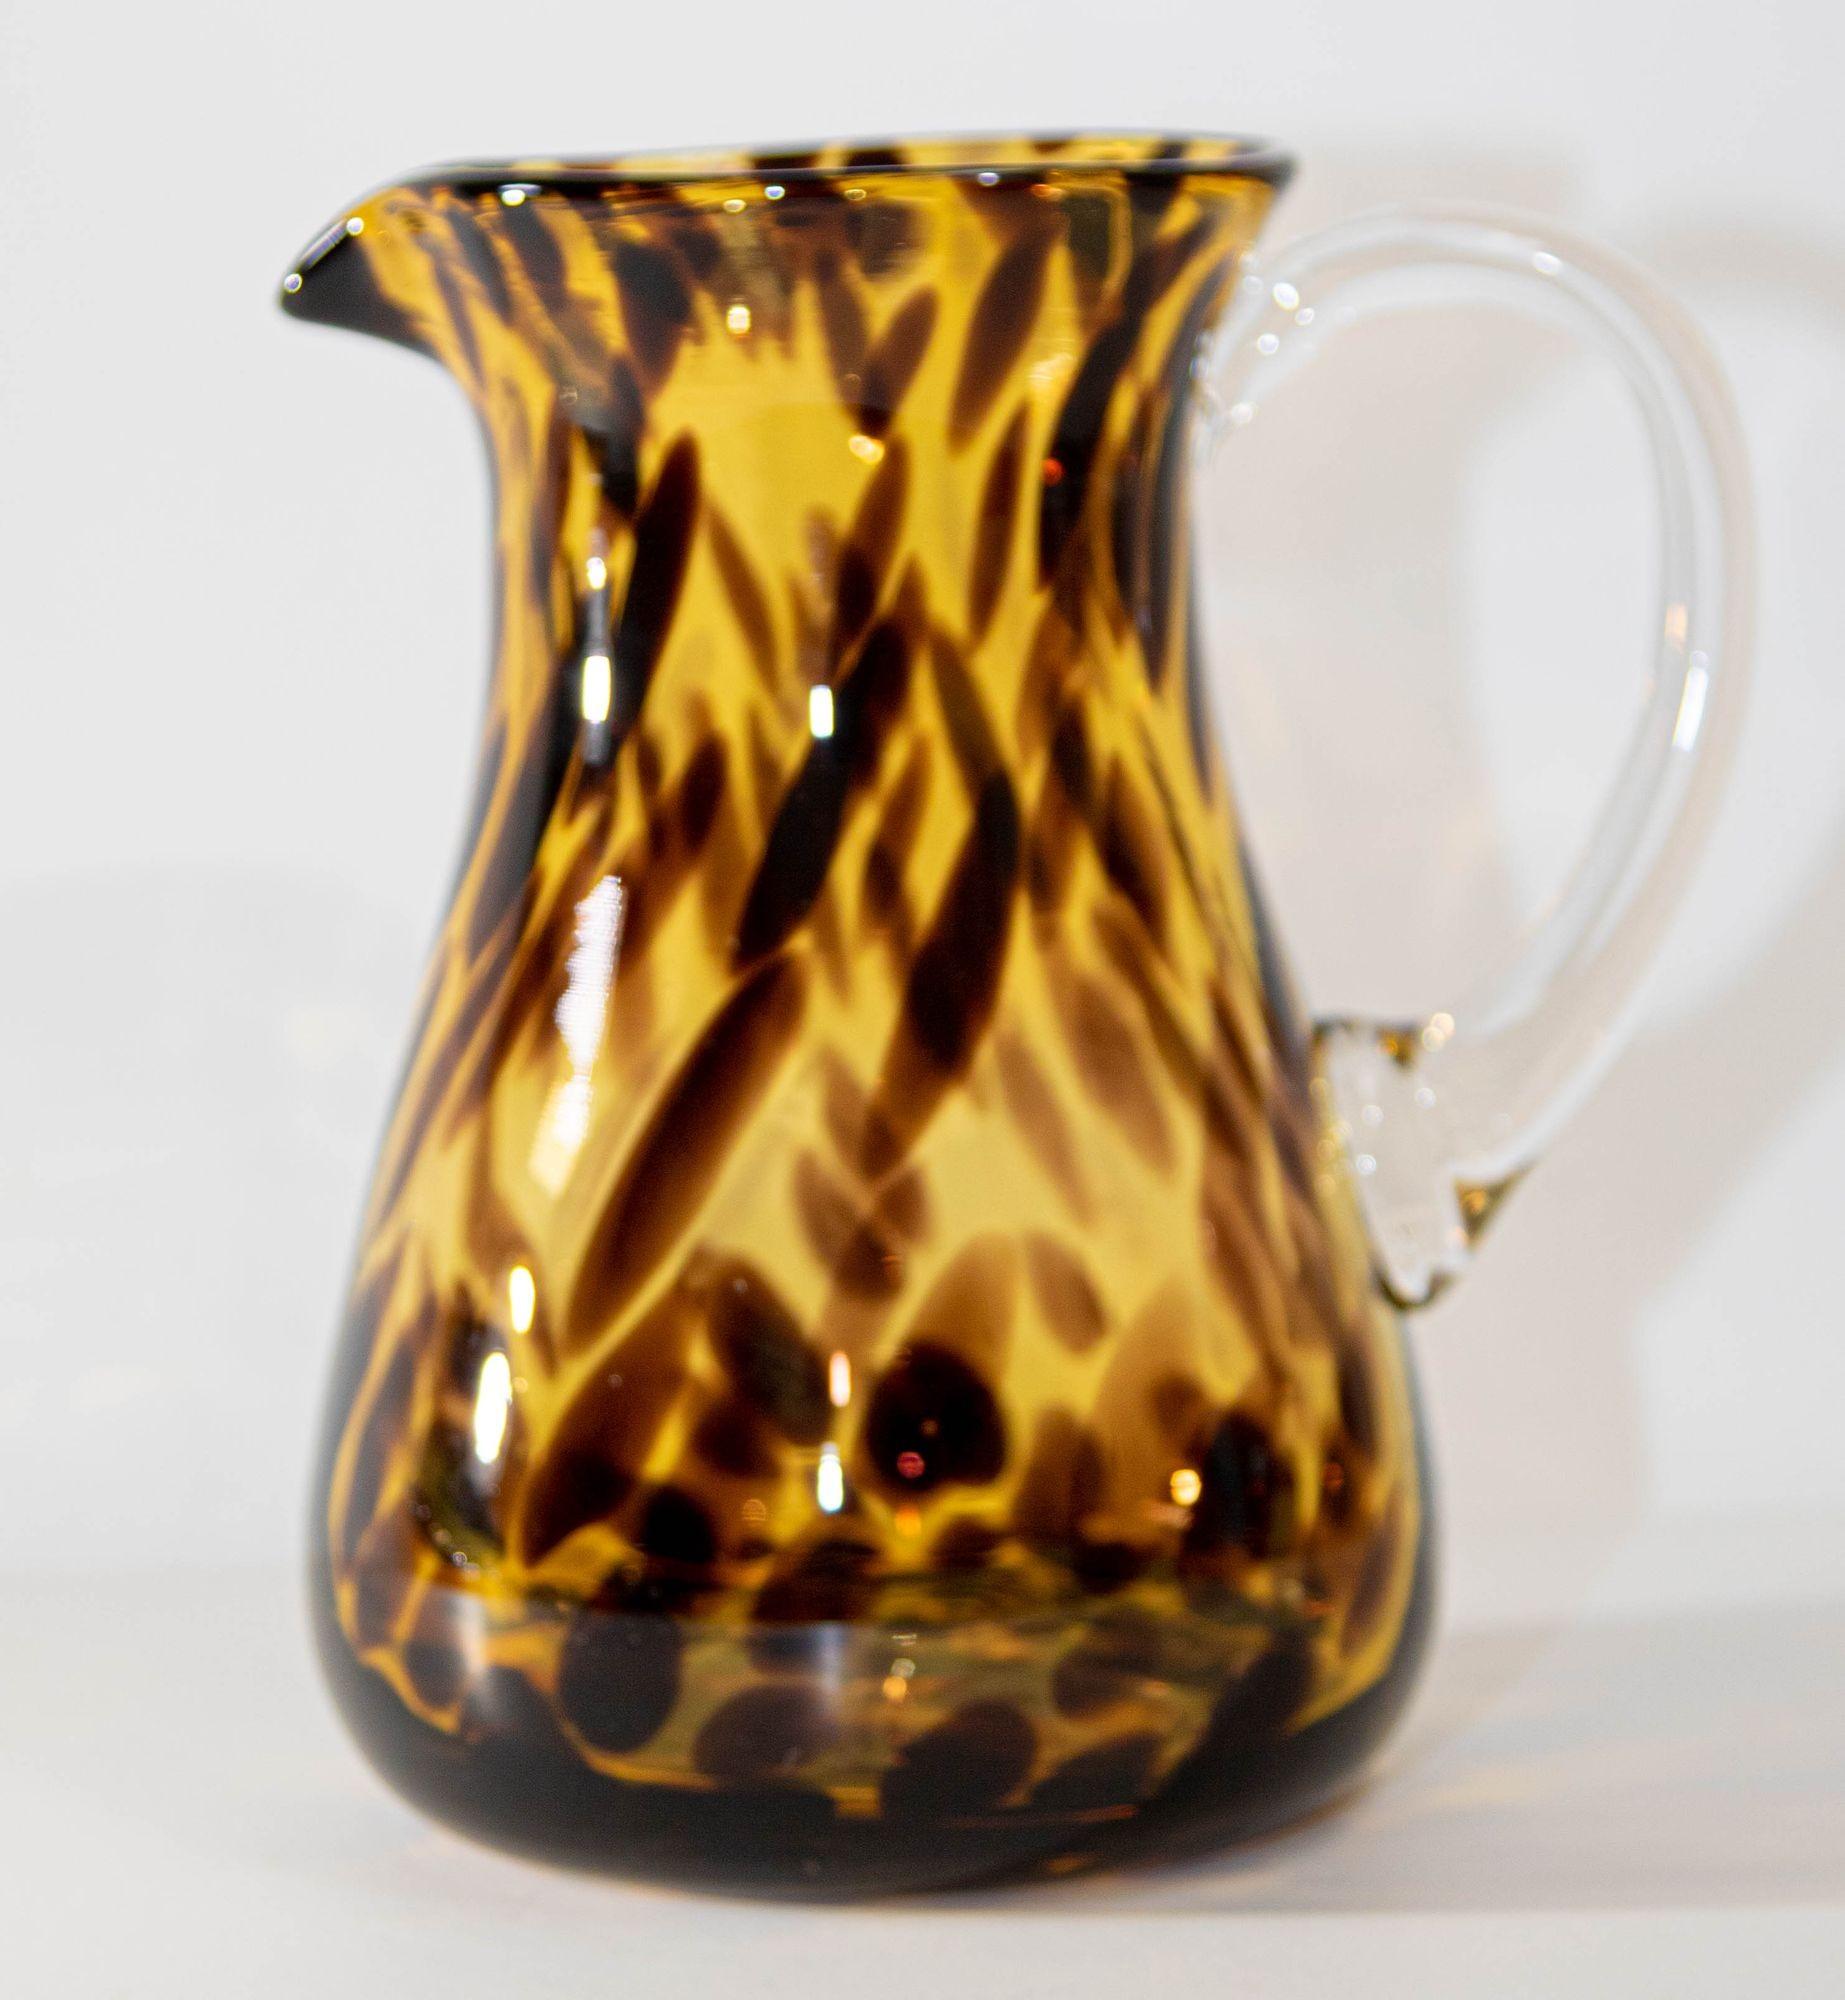 Vintage hand-blown glass pitcher in a tortoise shell pattern.
Elegant barware hand blown tortoise shell glass pitcher amber with clear glass handle.
A distinctive tortoise shell motif brings rich color and dimension to a glass carafe that makes a